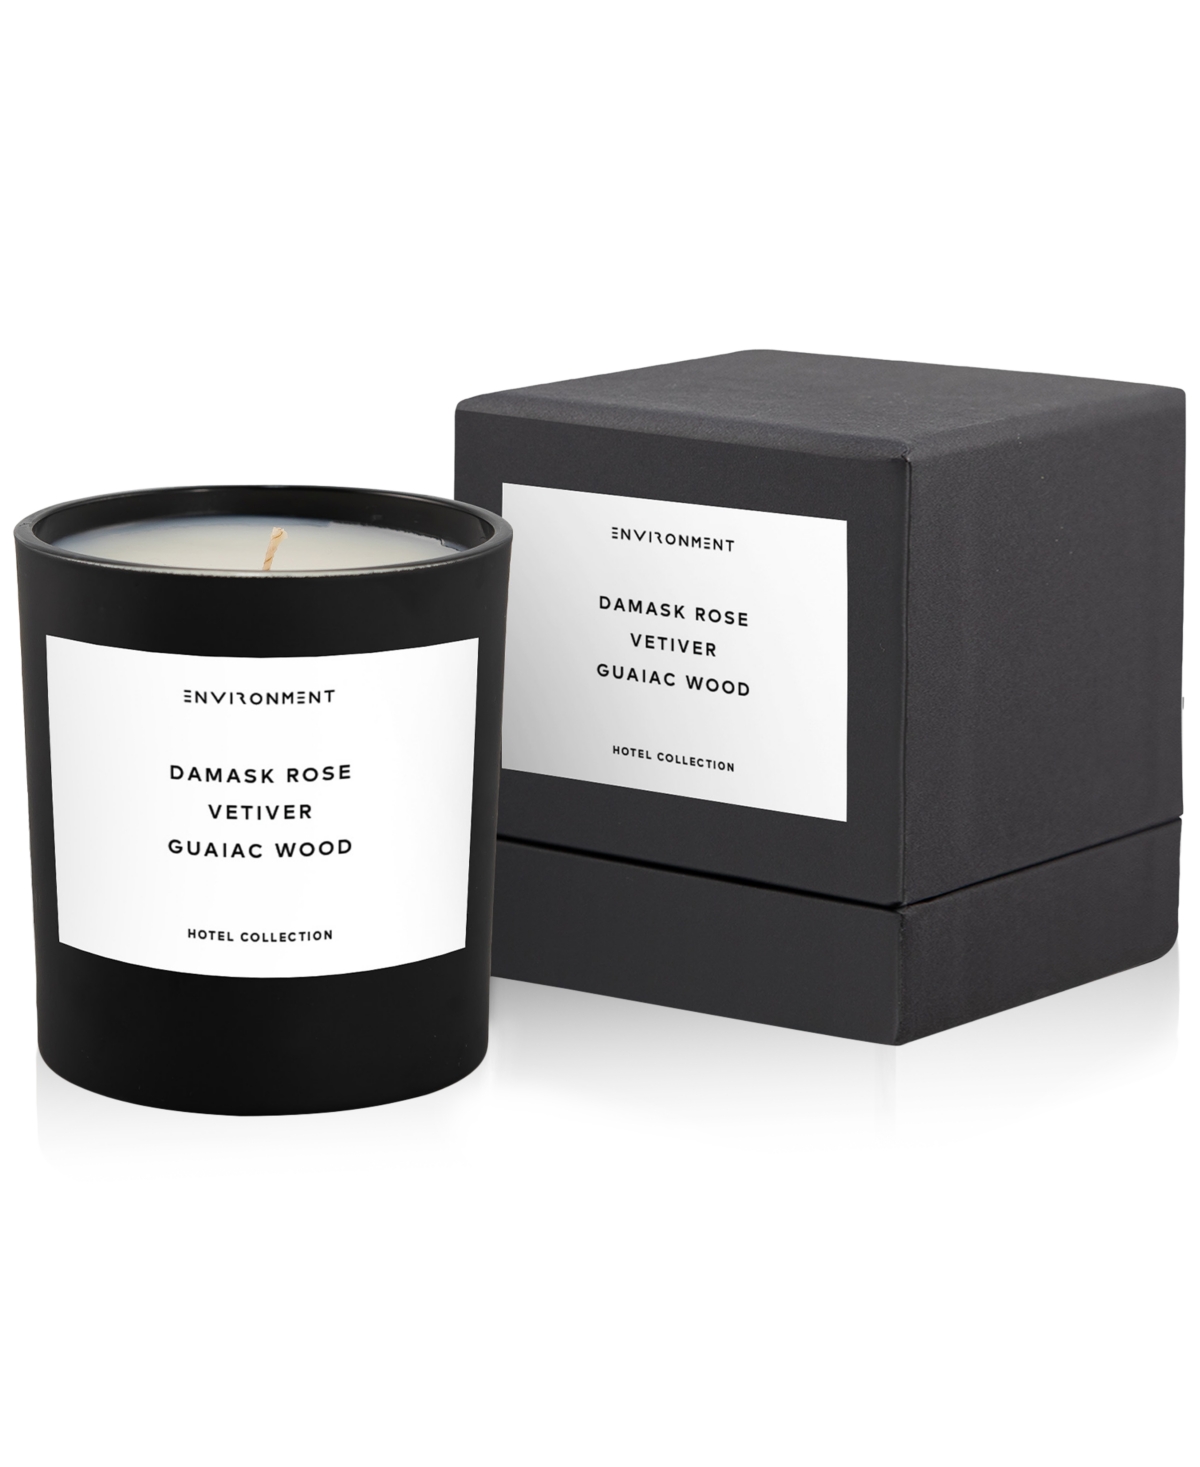 Damask Rose, Vetiver & Guaiac Wood Candle (Inspired by 5-Star Hotels), 8 oz.